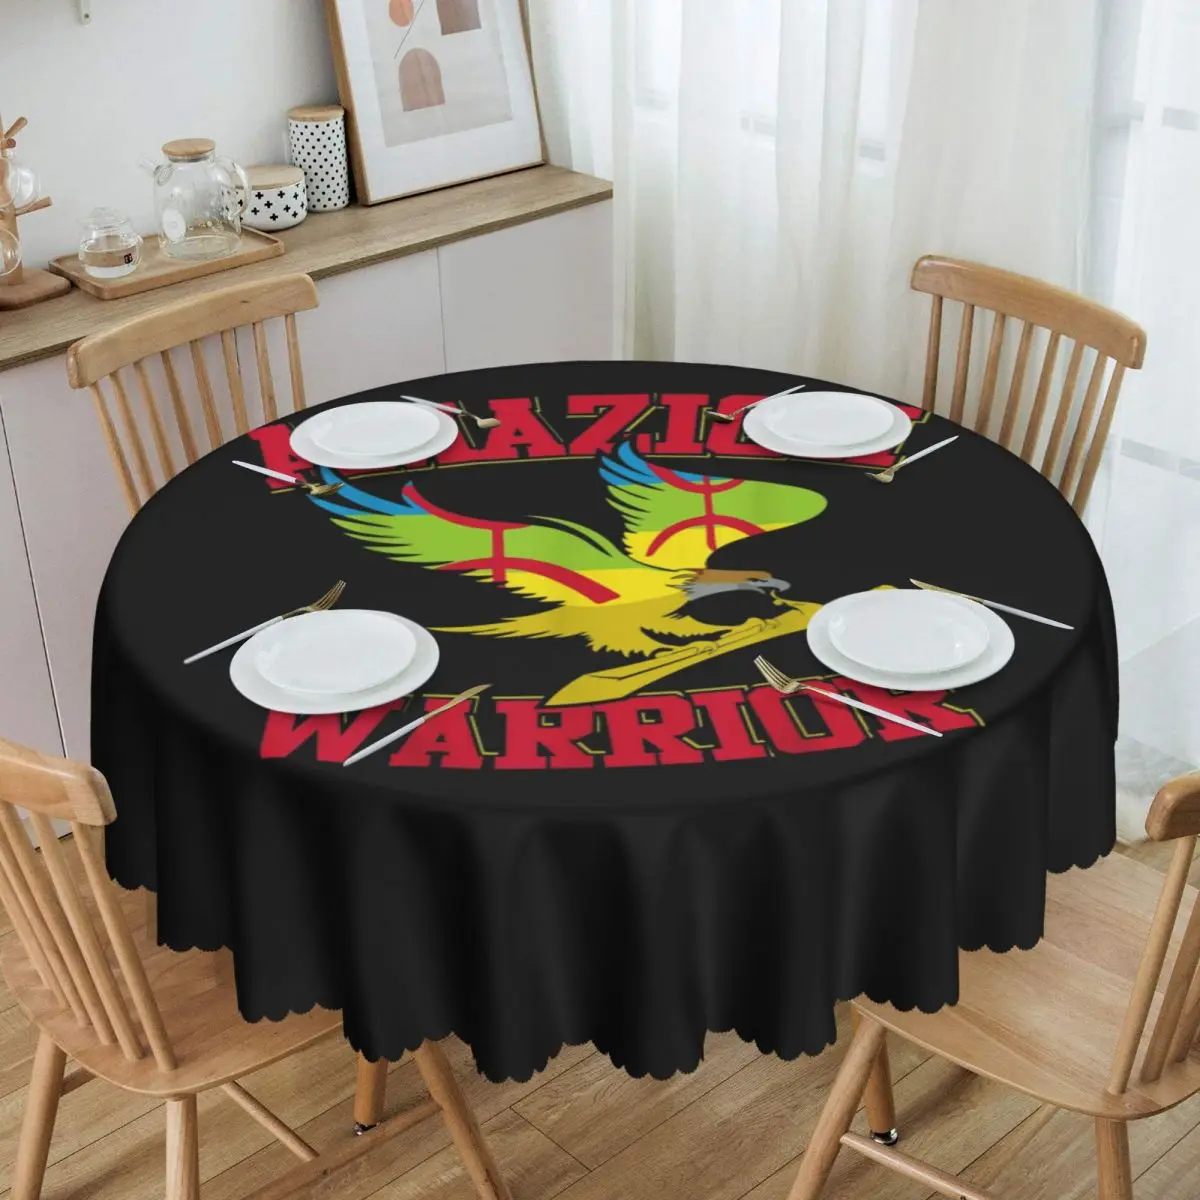 

Oilproof Amazigh Warrior Kabyle Berber Amazigh Flag Gift Table Cover Geometry Carpet Berber Tablecloth for Dining Table Cloth